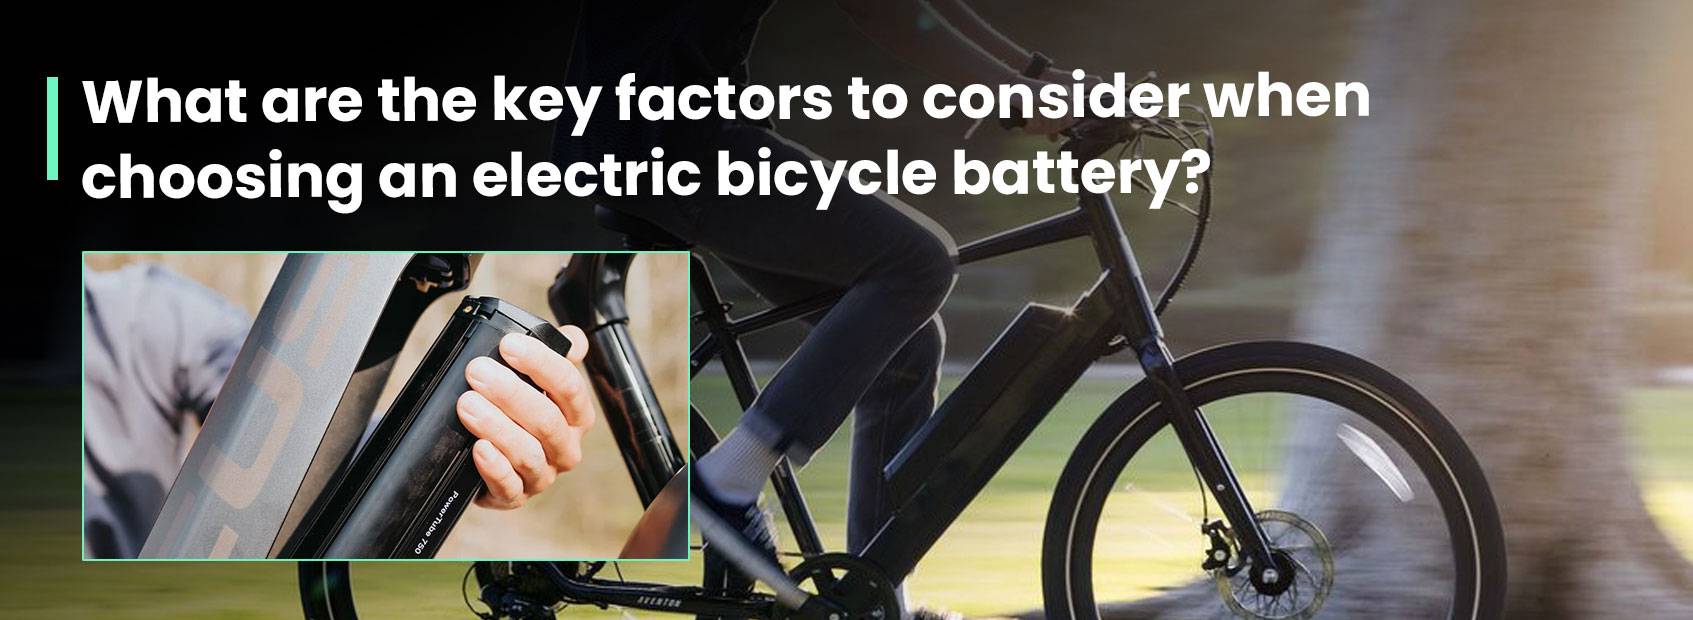 What are the key factors to consider when choosing an electric bicycle battery? 